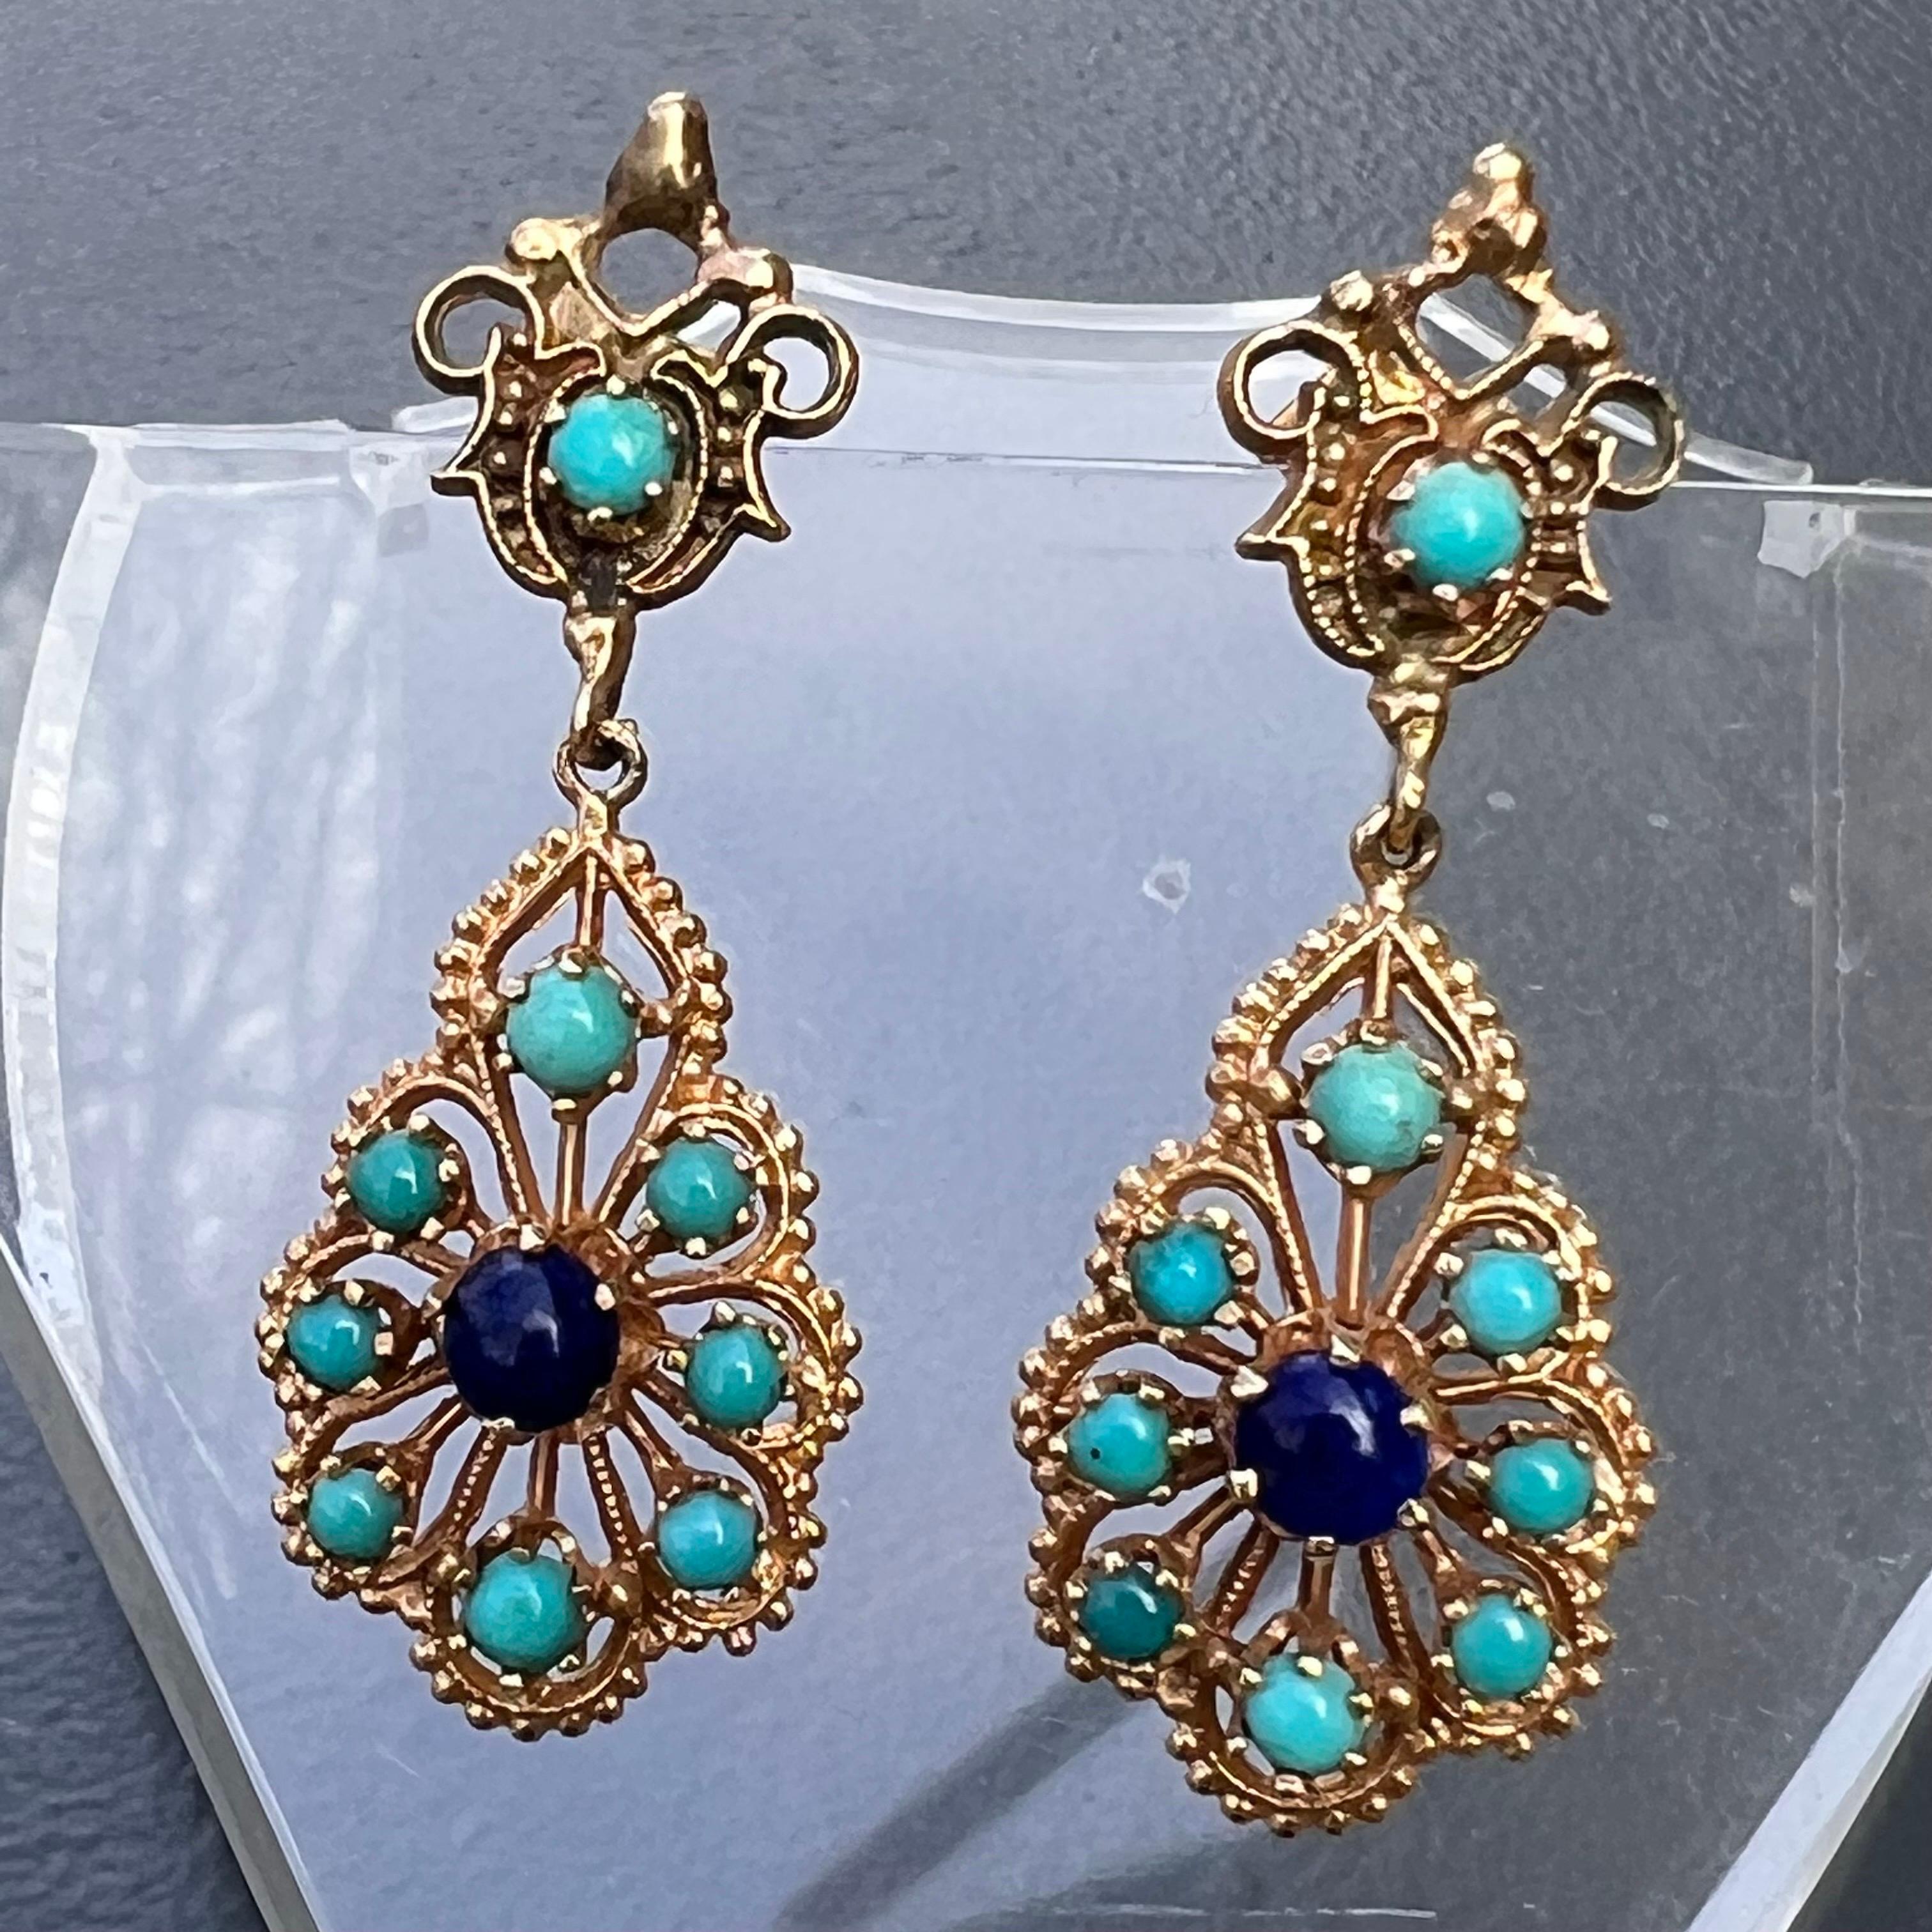 Elegant vintage Victorian revival 14kt solid gold dangle drop earrings for pierced ears with 9 Persian turquoise and two prong set lapis beads /cabs set on an openwork gold base . Front of earrings have small gold bead work border .
marked 14kt on